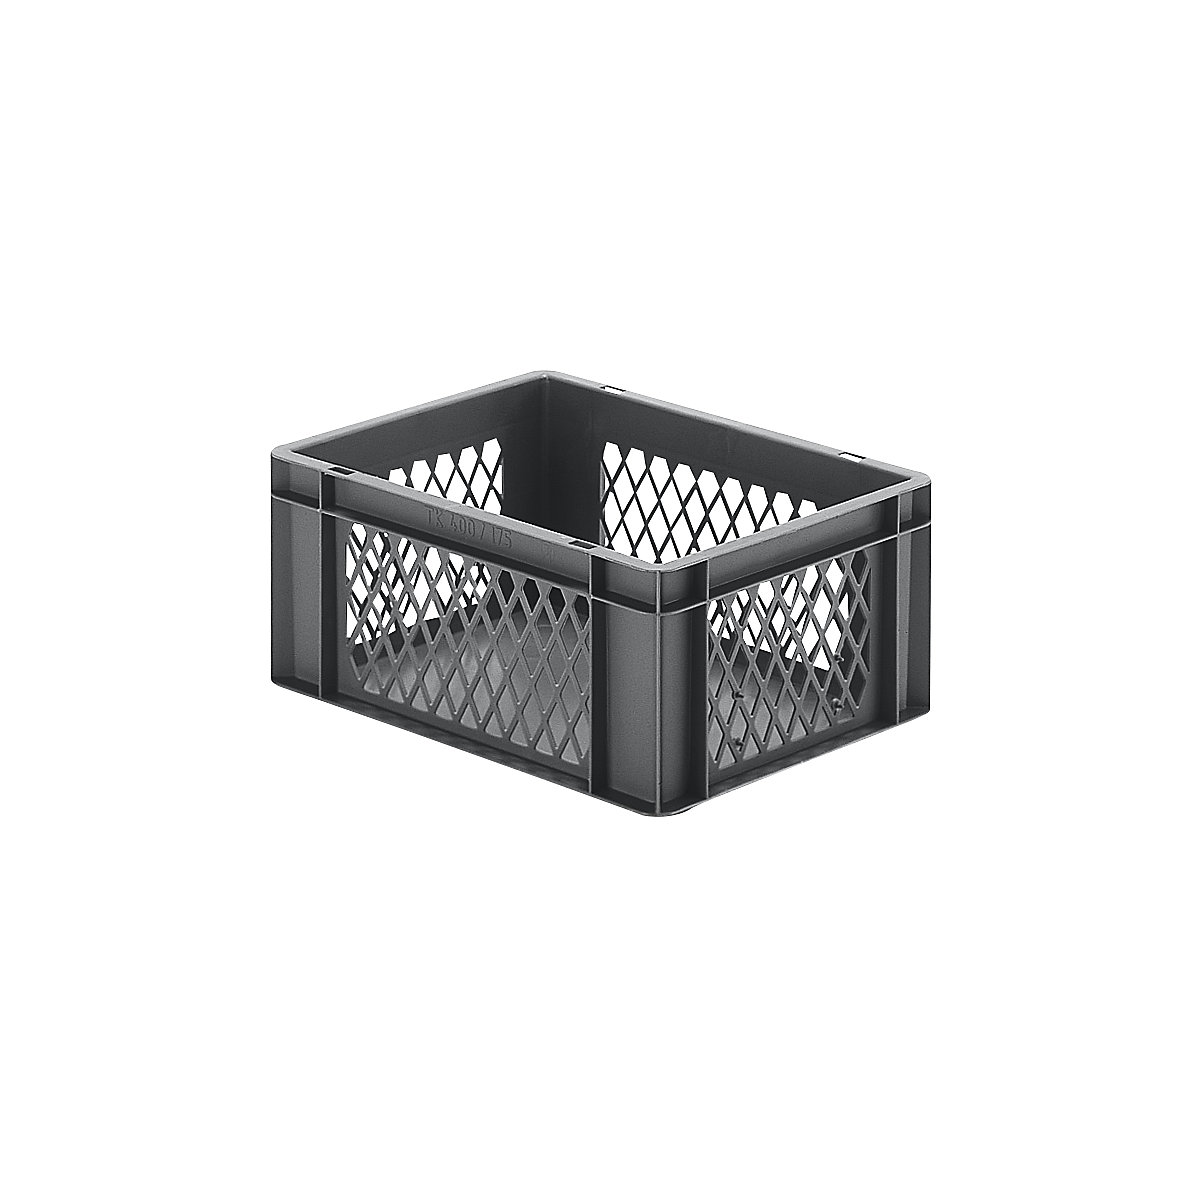 Euro stacking container, perforated walls, closed base, LxWxH 400 x 300 x 175 mm, grey, pack of 5